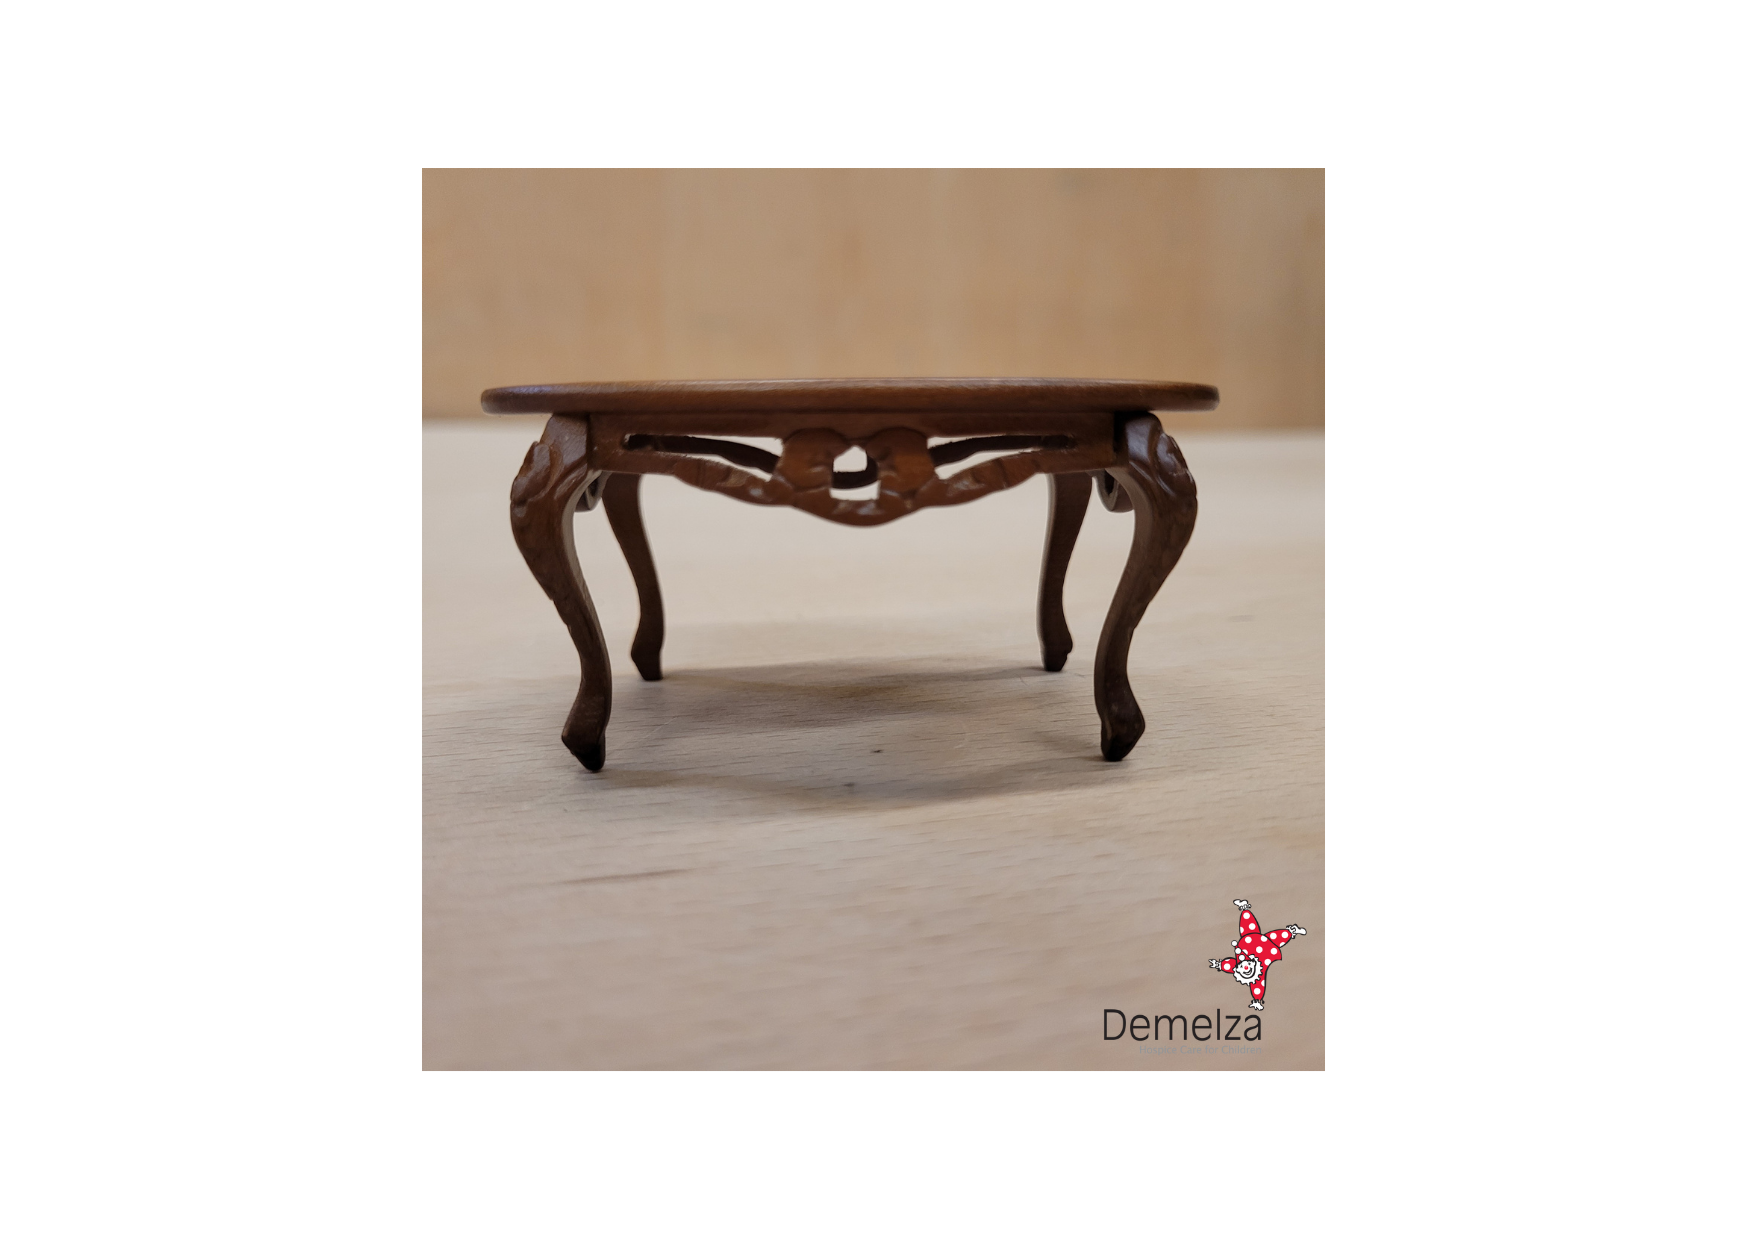 Dolls House 1:12 Scale Walnut Coffee Table Detail View